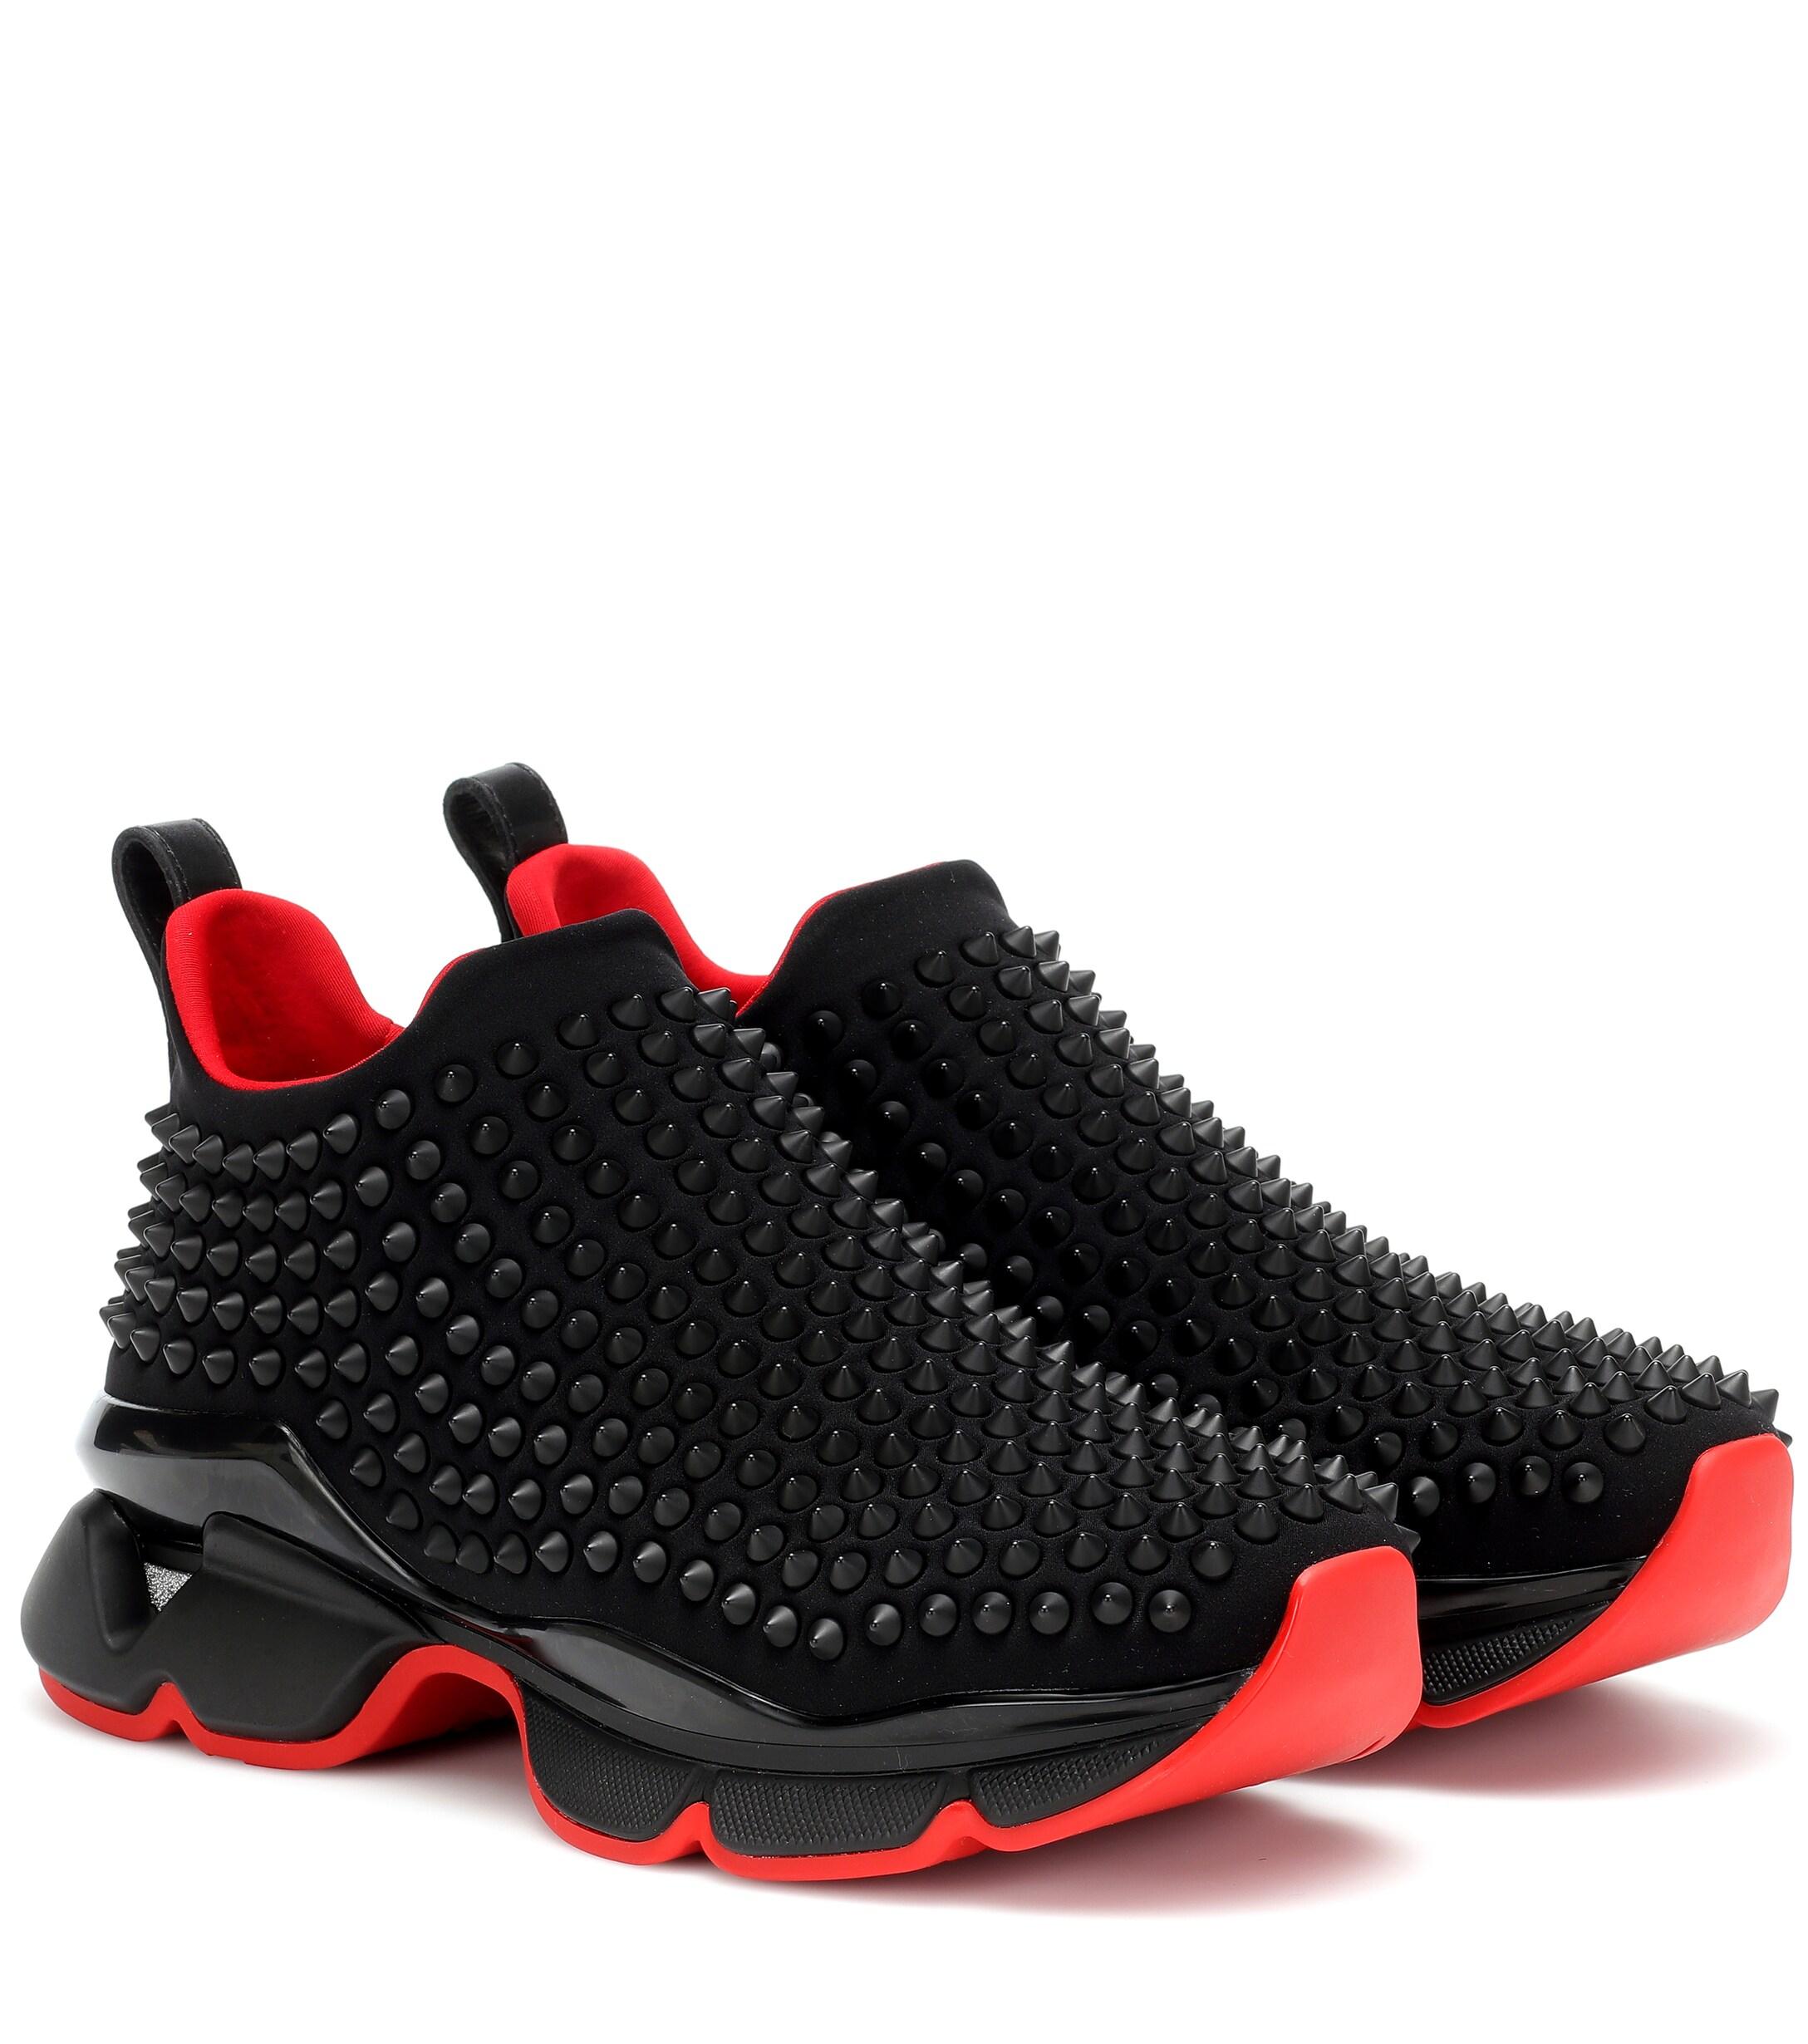 Christian Louboutin Spike Sock Donna Flat Sneakers in Black - Save 